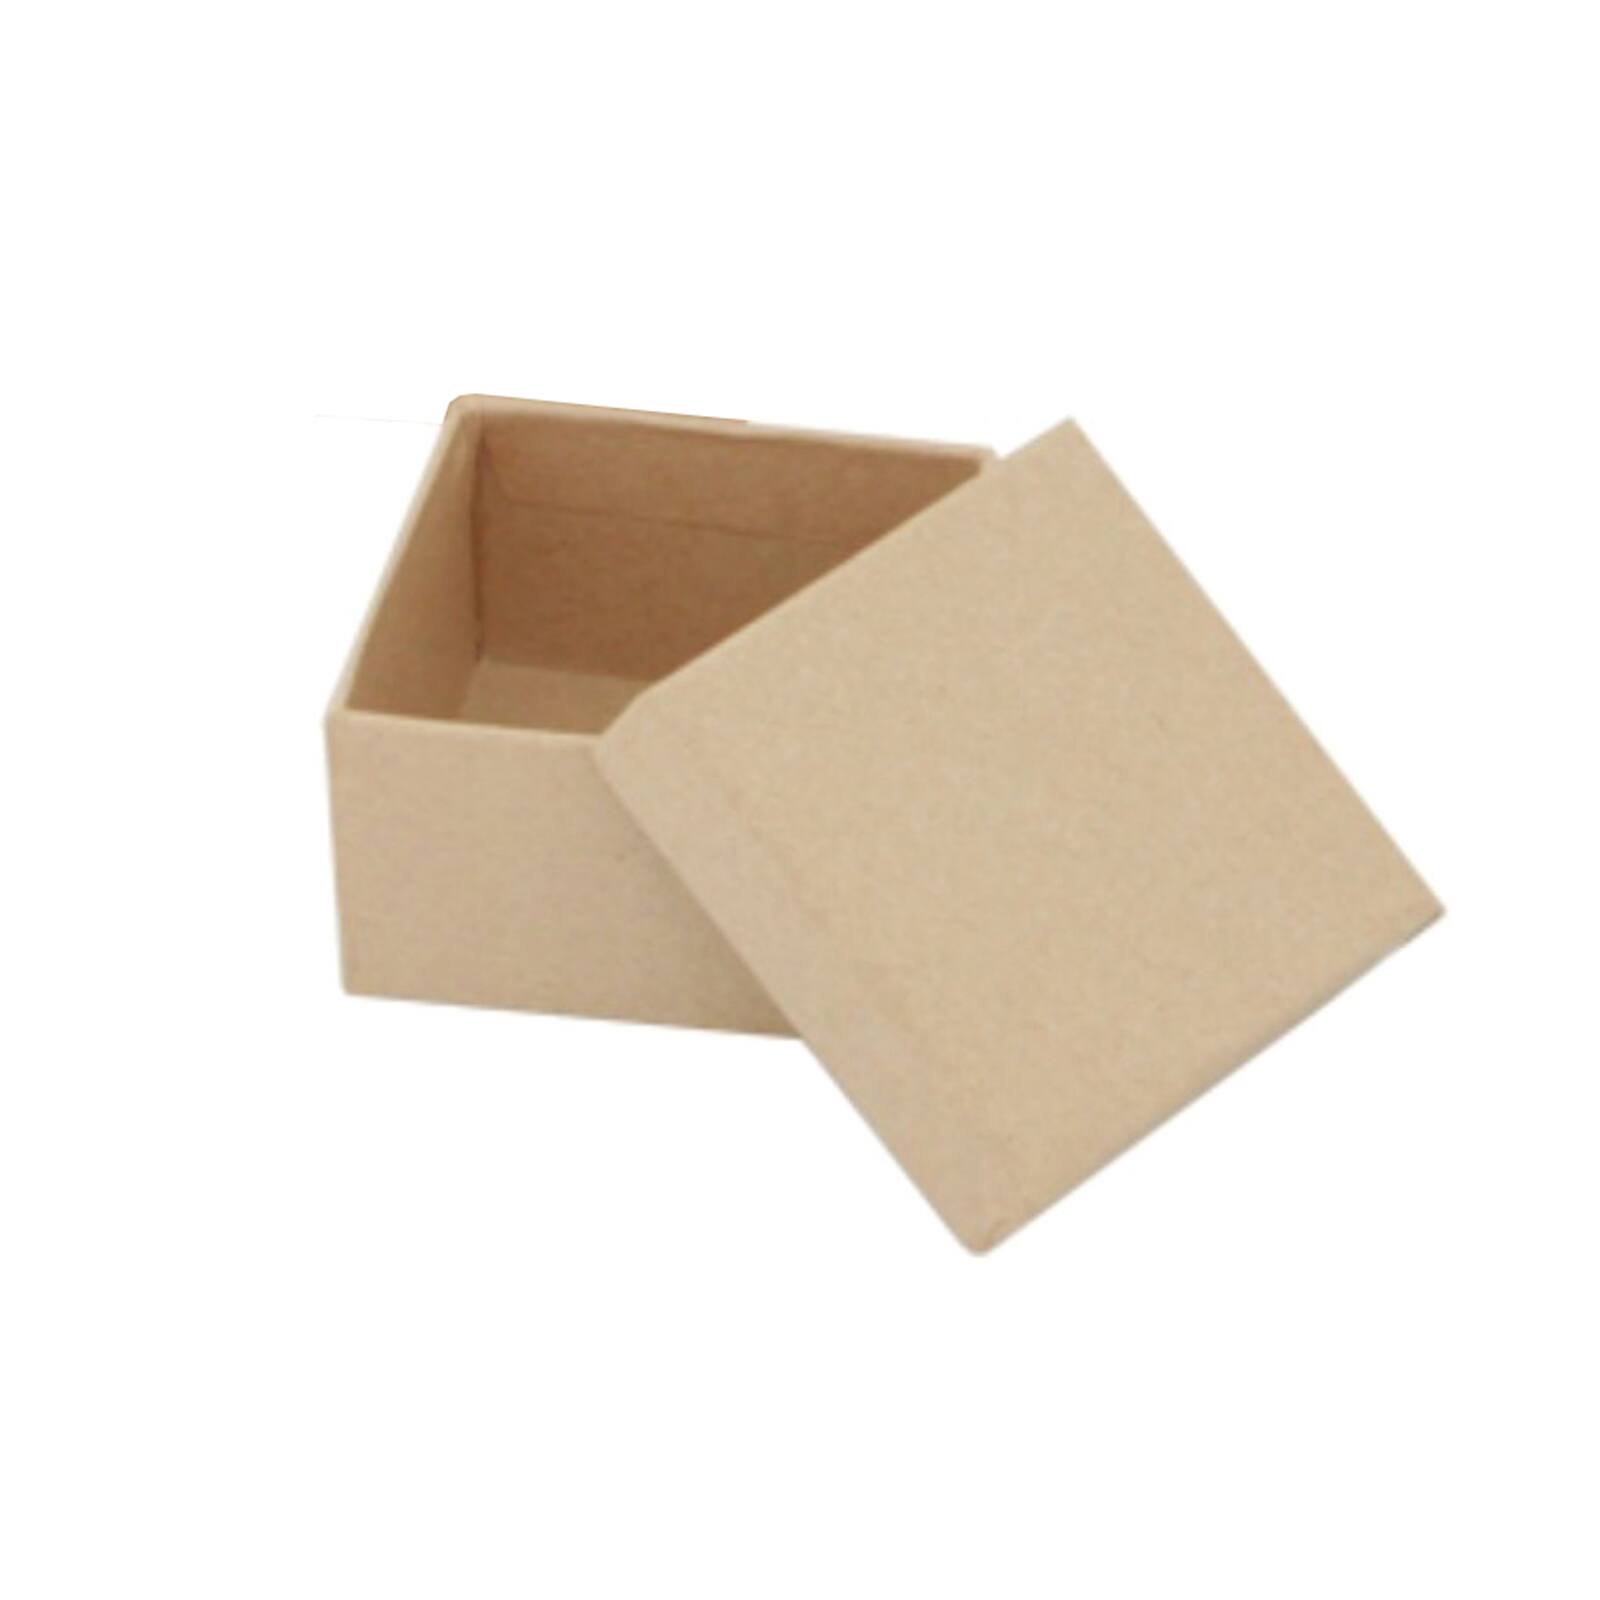 Square Paper Mache Boxes with Lids Package of 4 Boxes 